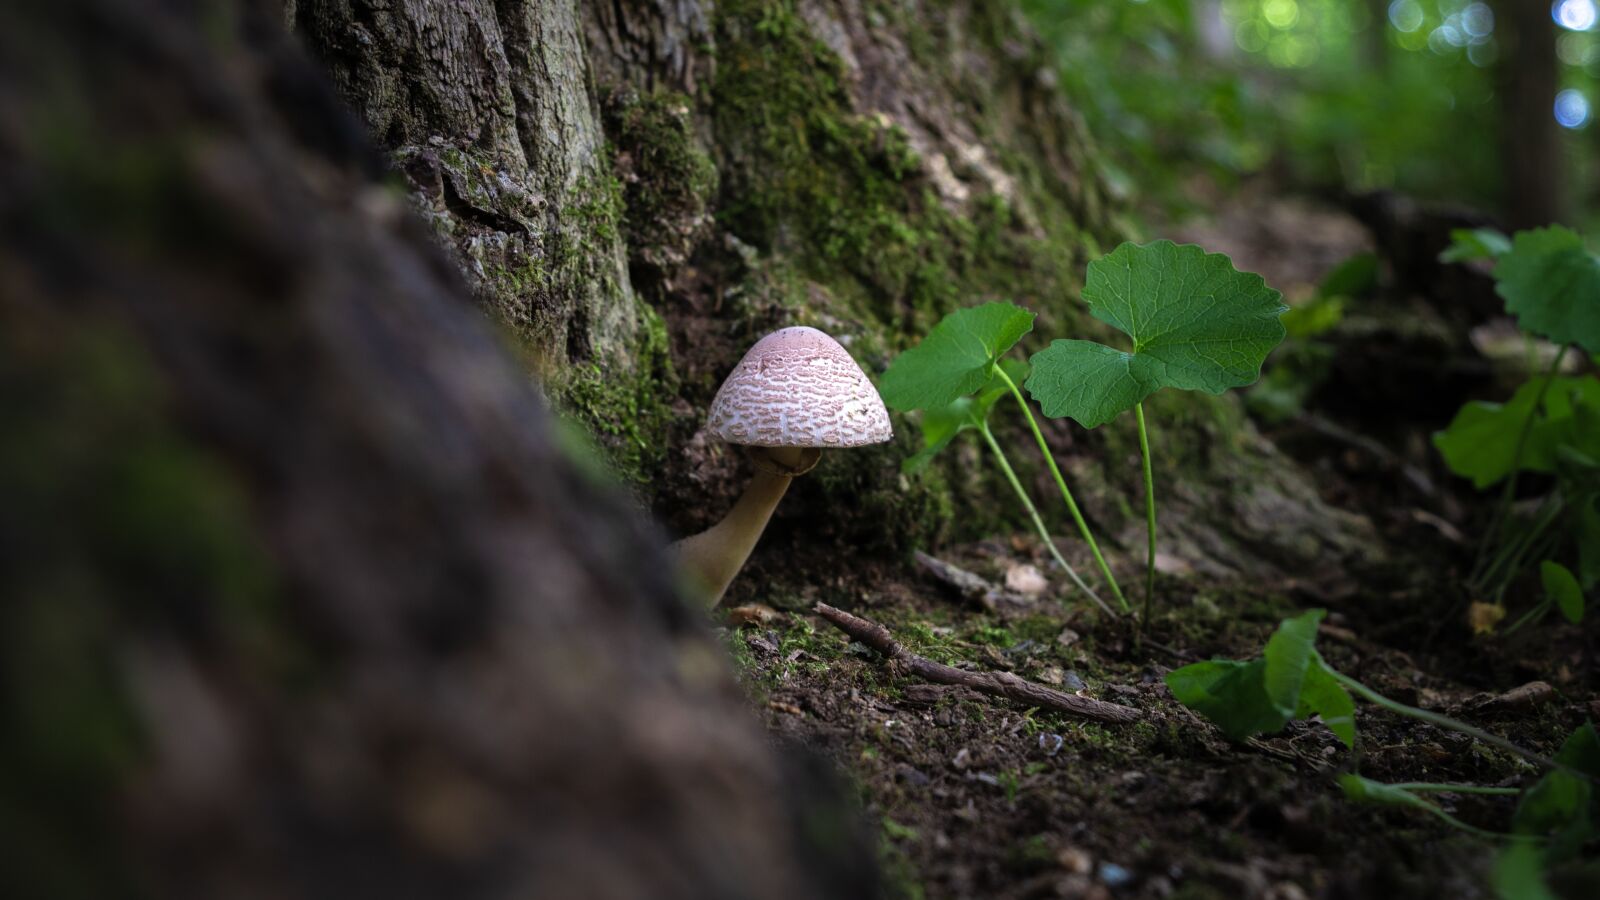 Sony a6300 sample photo. Mushroom, forrest, nature photography